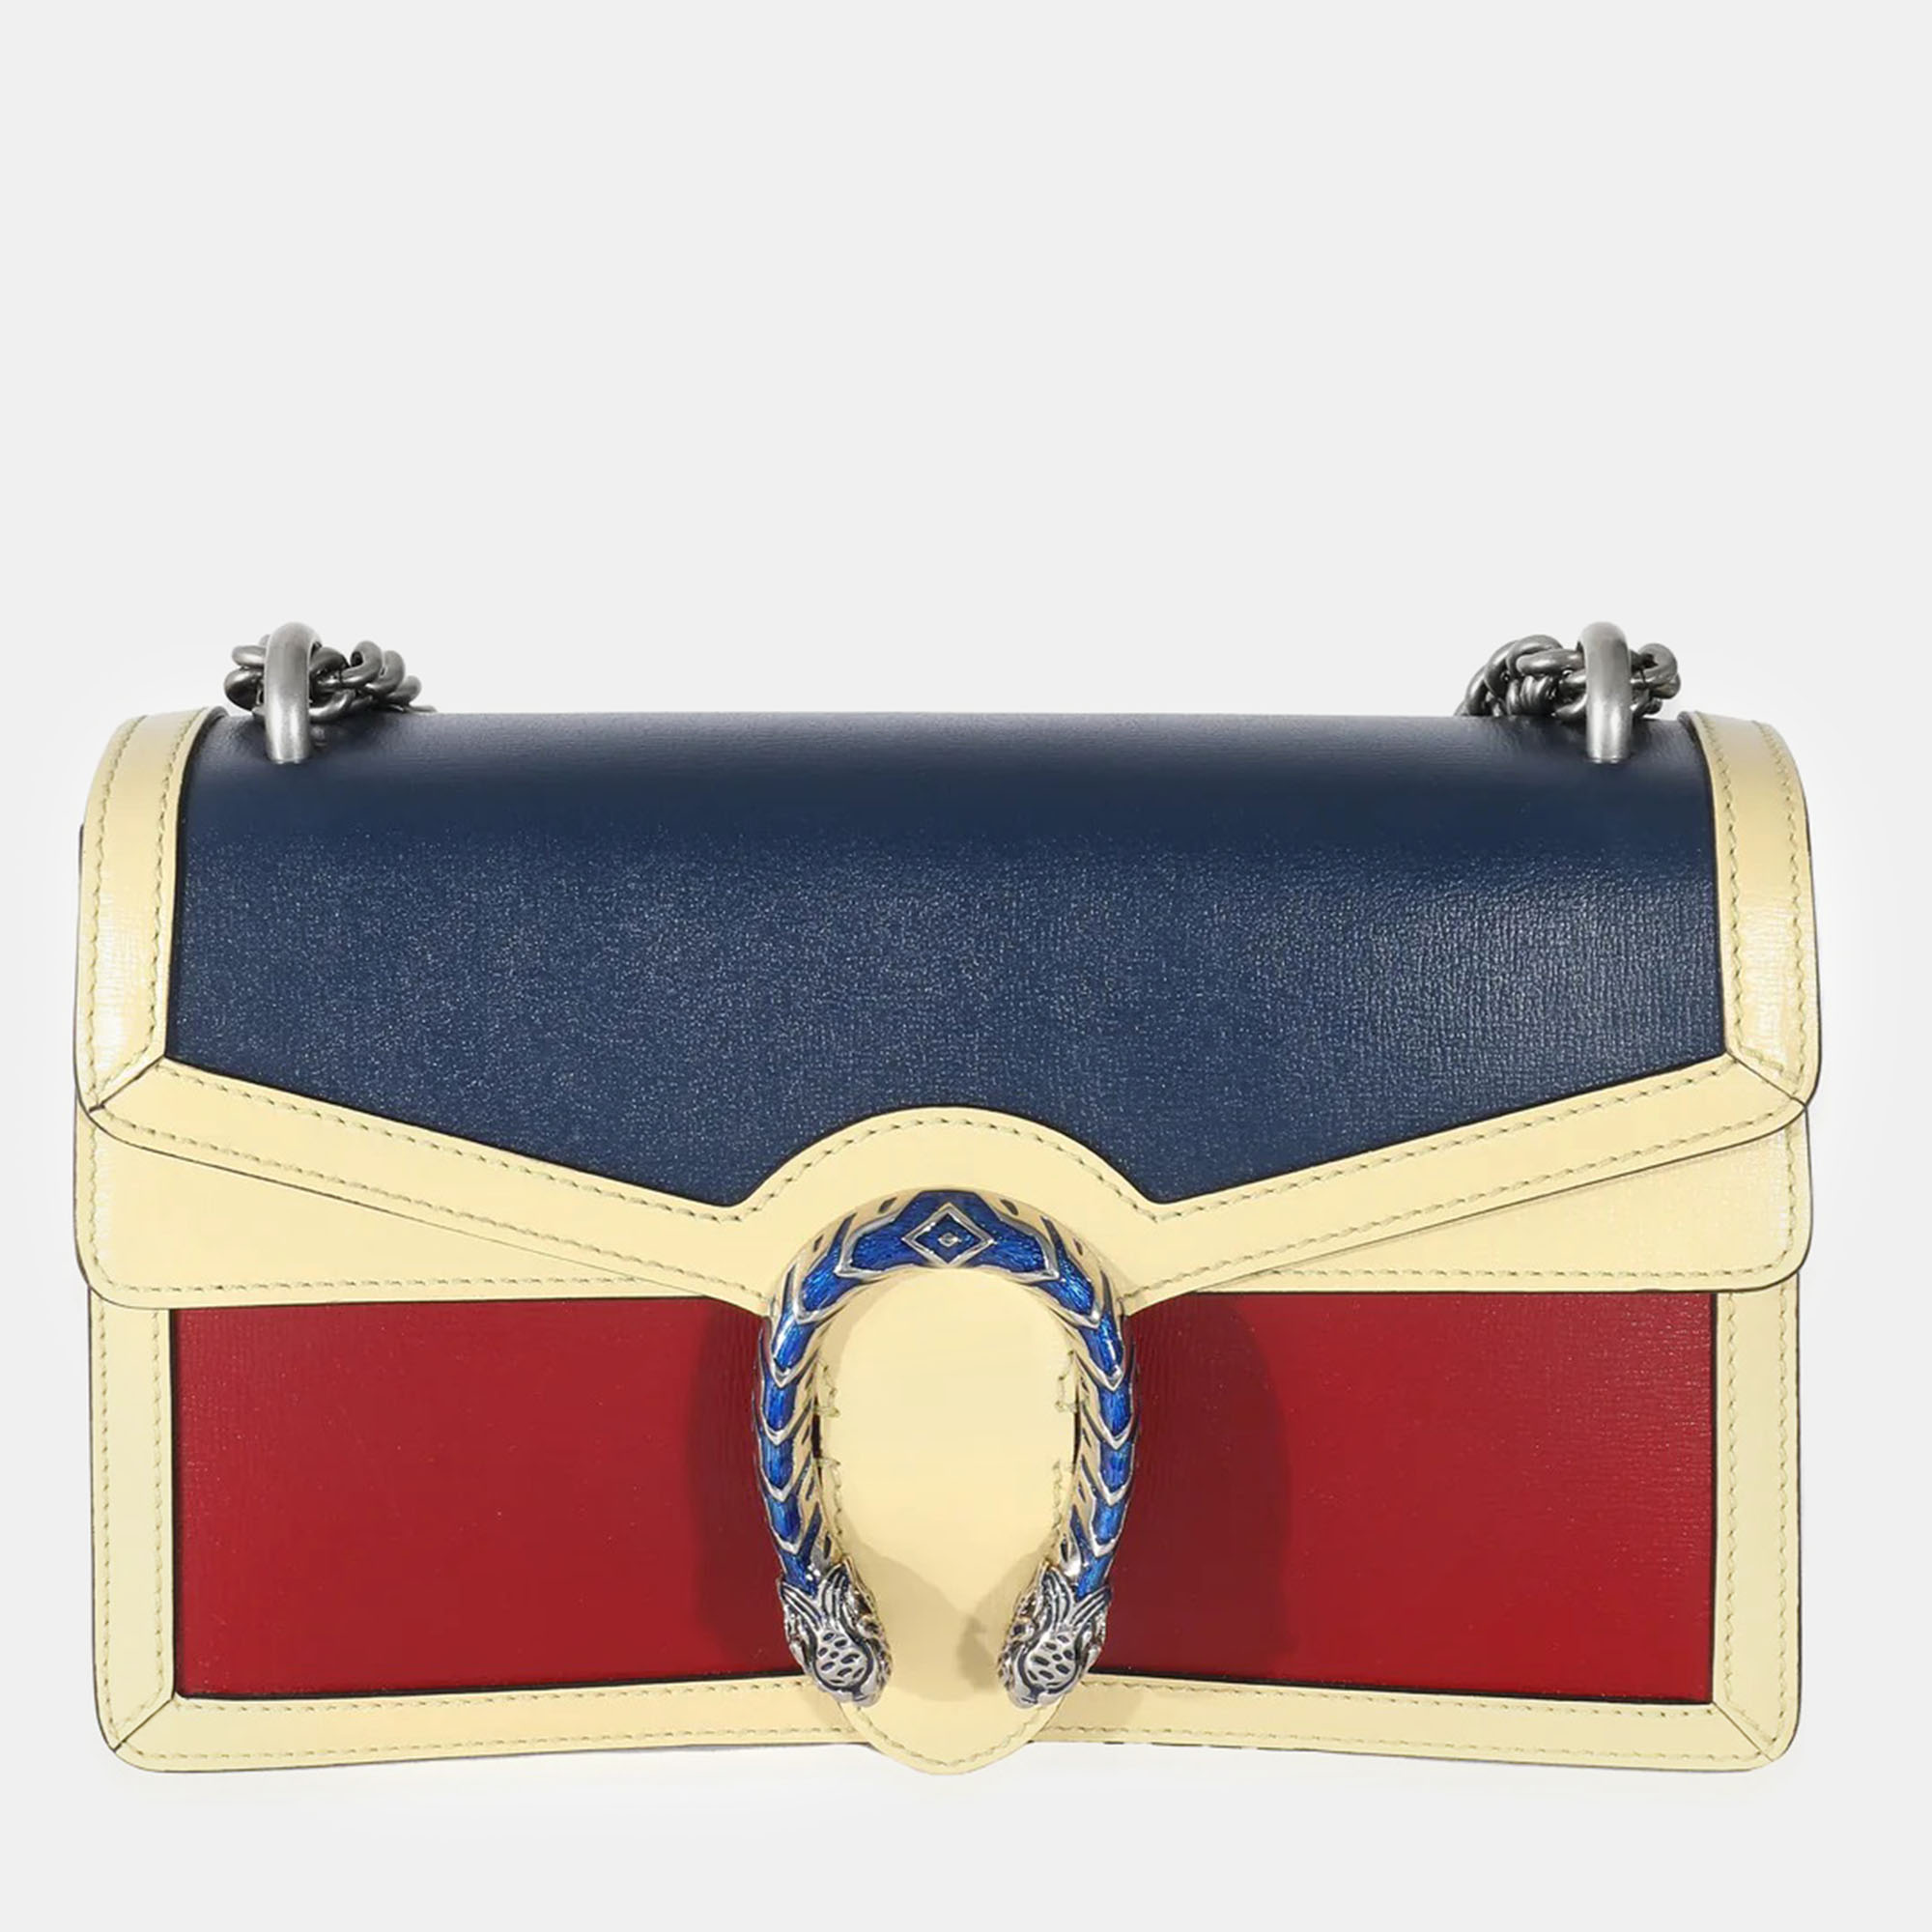 Gucci multicolour leather small dionysus shoulder bag